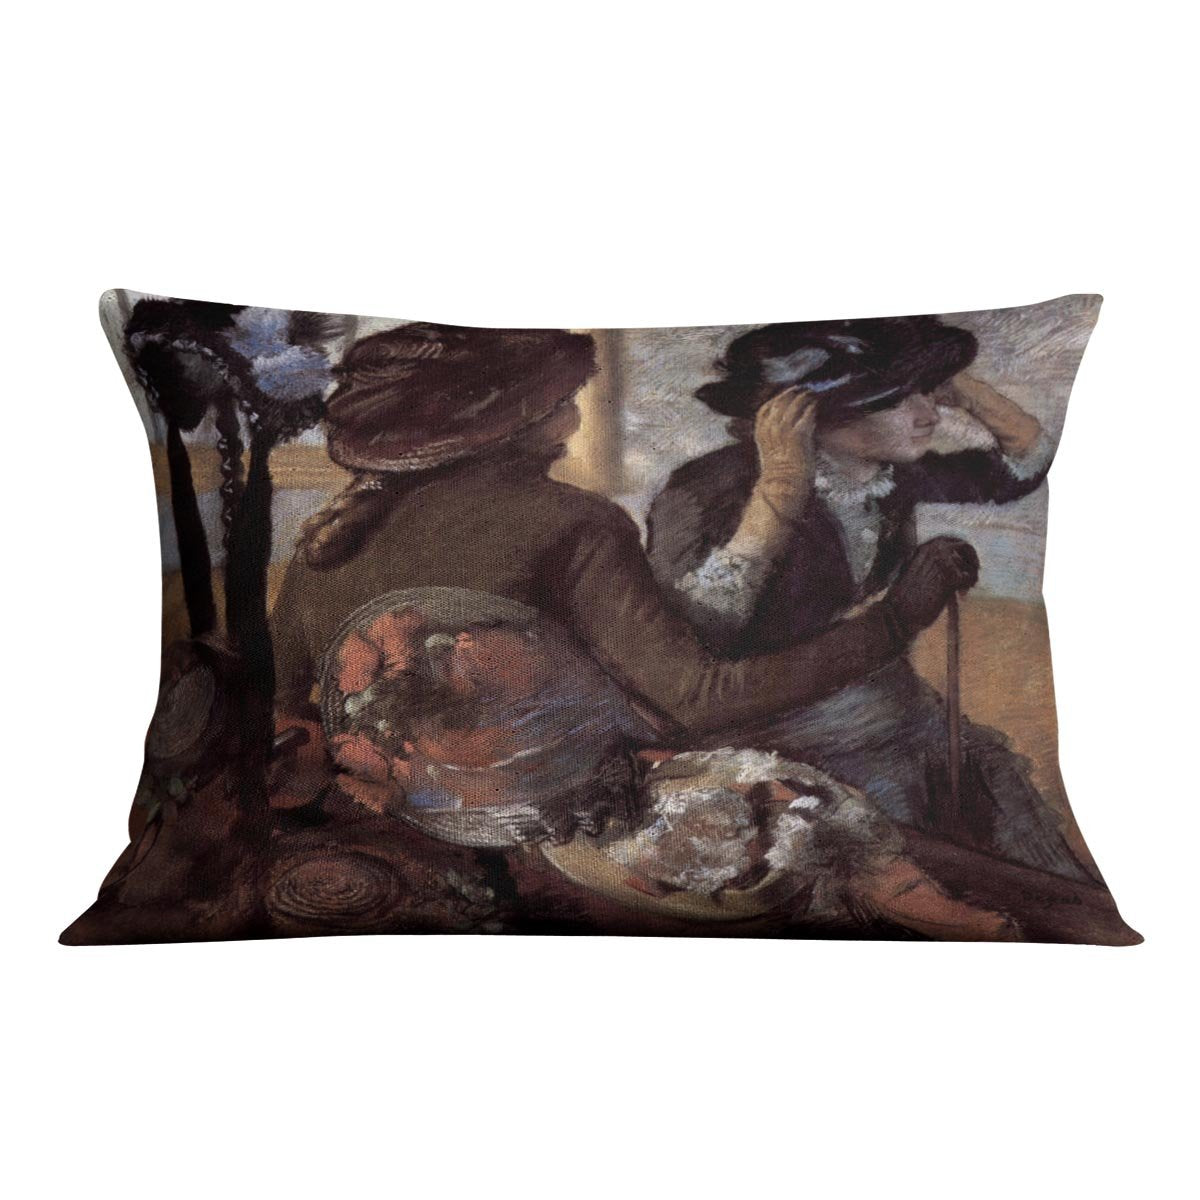 The milliner 1 by Degas Cushion